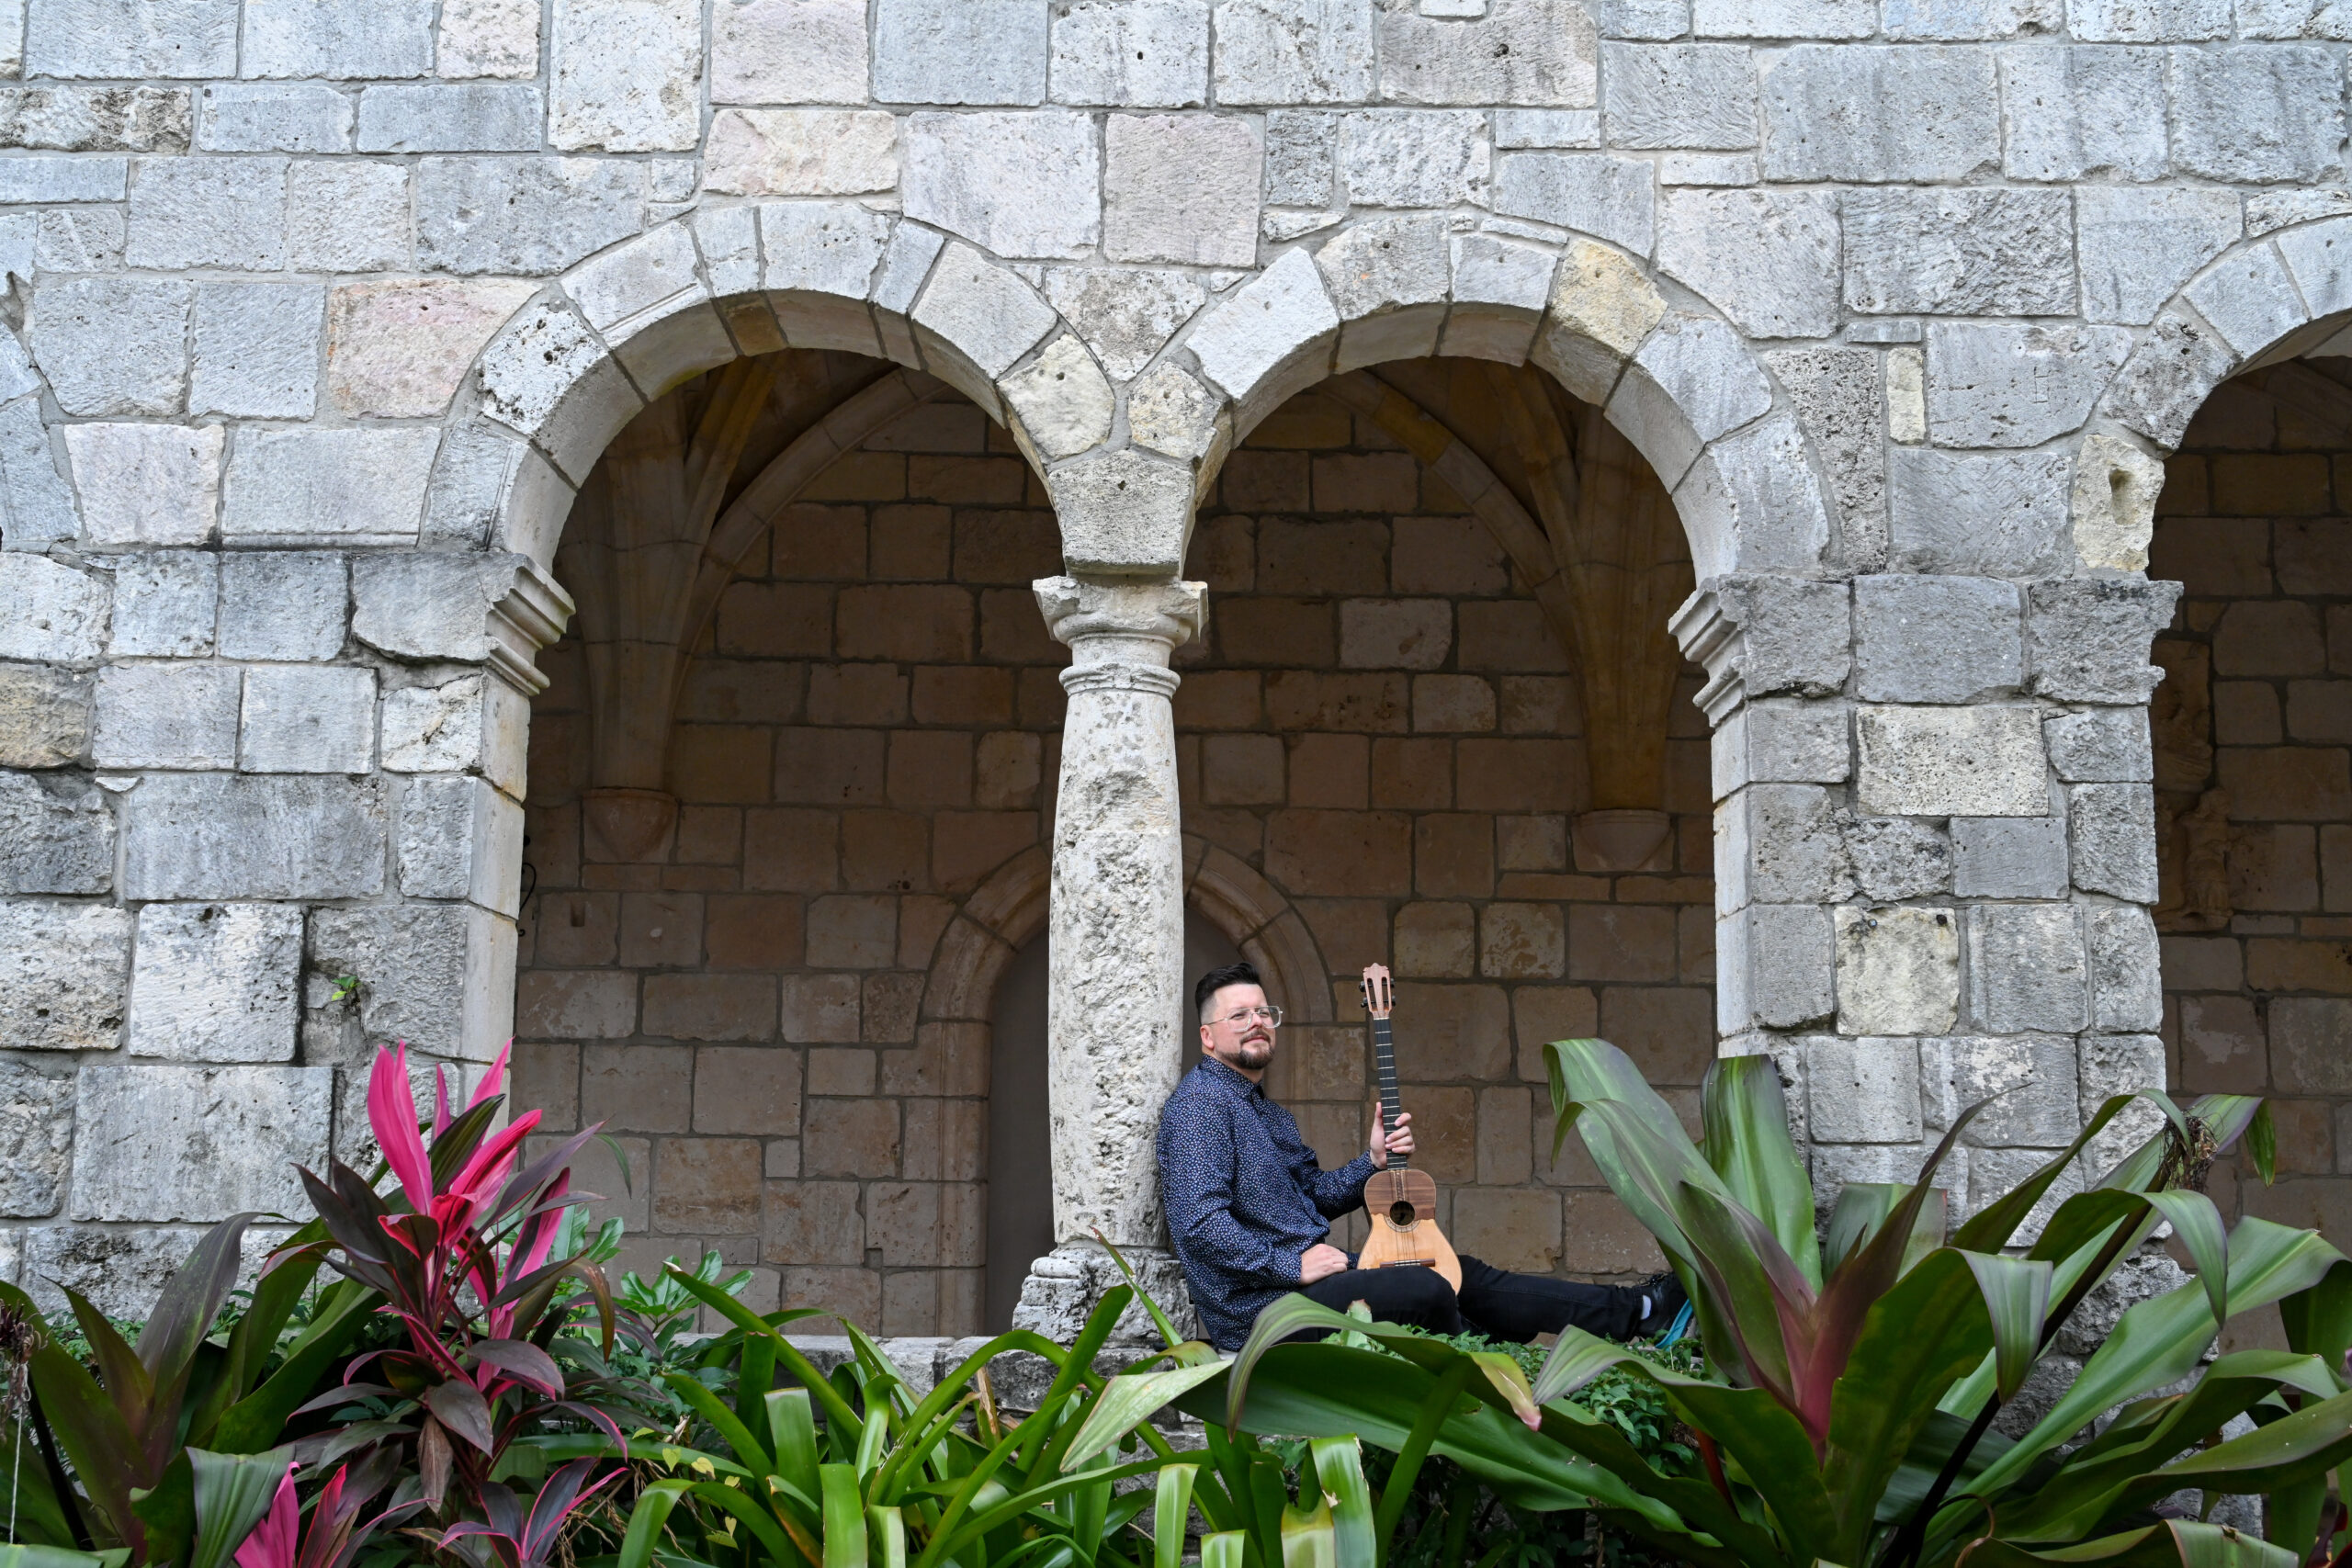 Henry is sitting under two arches, leaning on the pillar between them while holding his cuatro guitar upright in his hands.